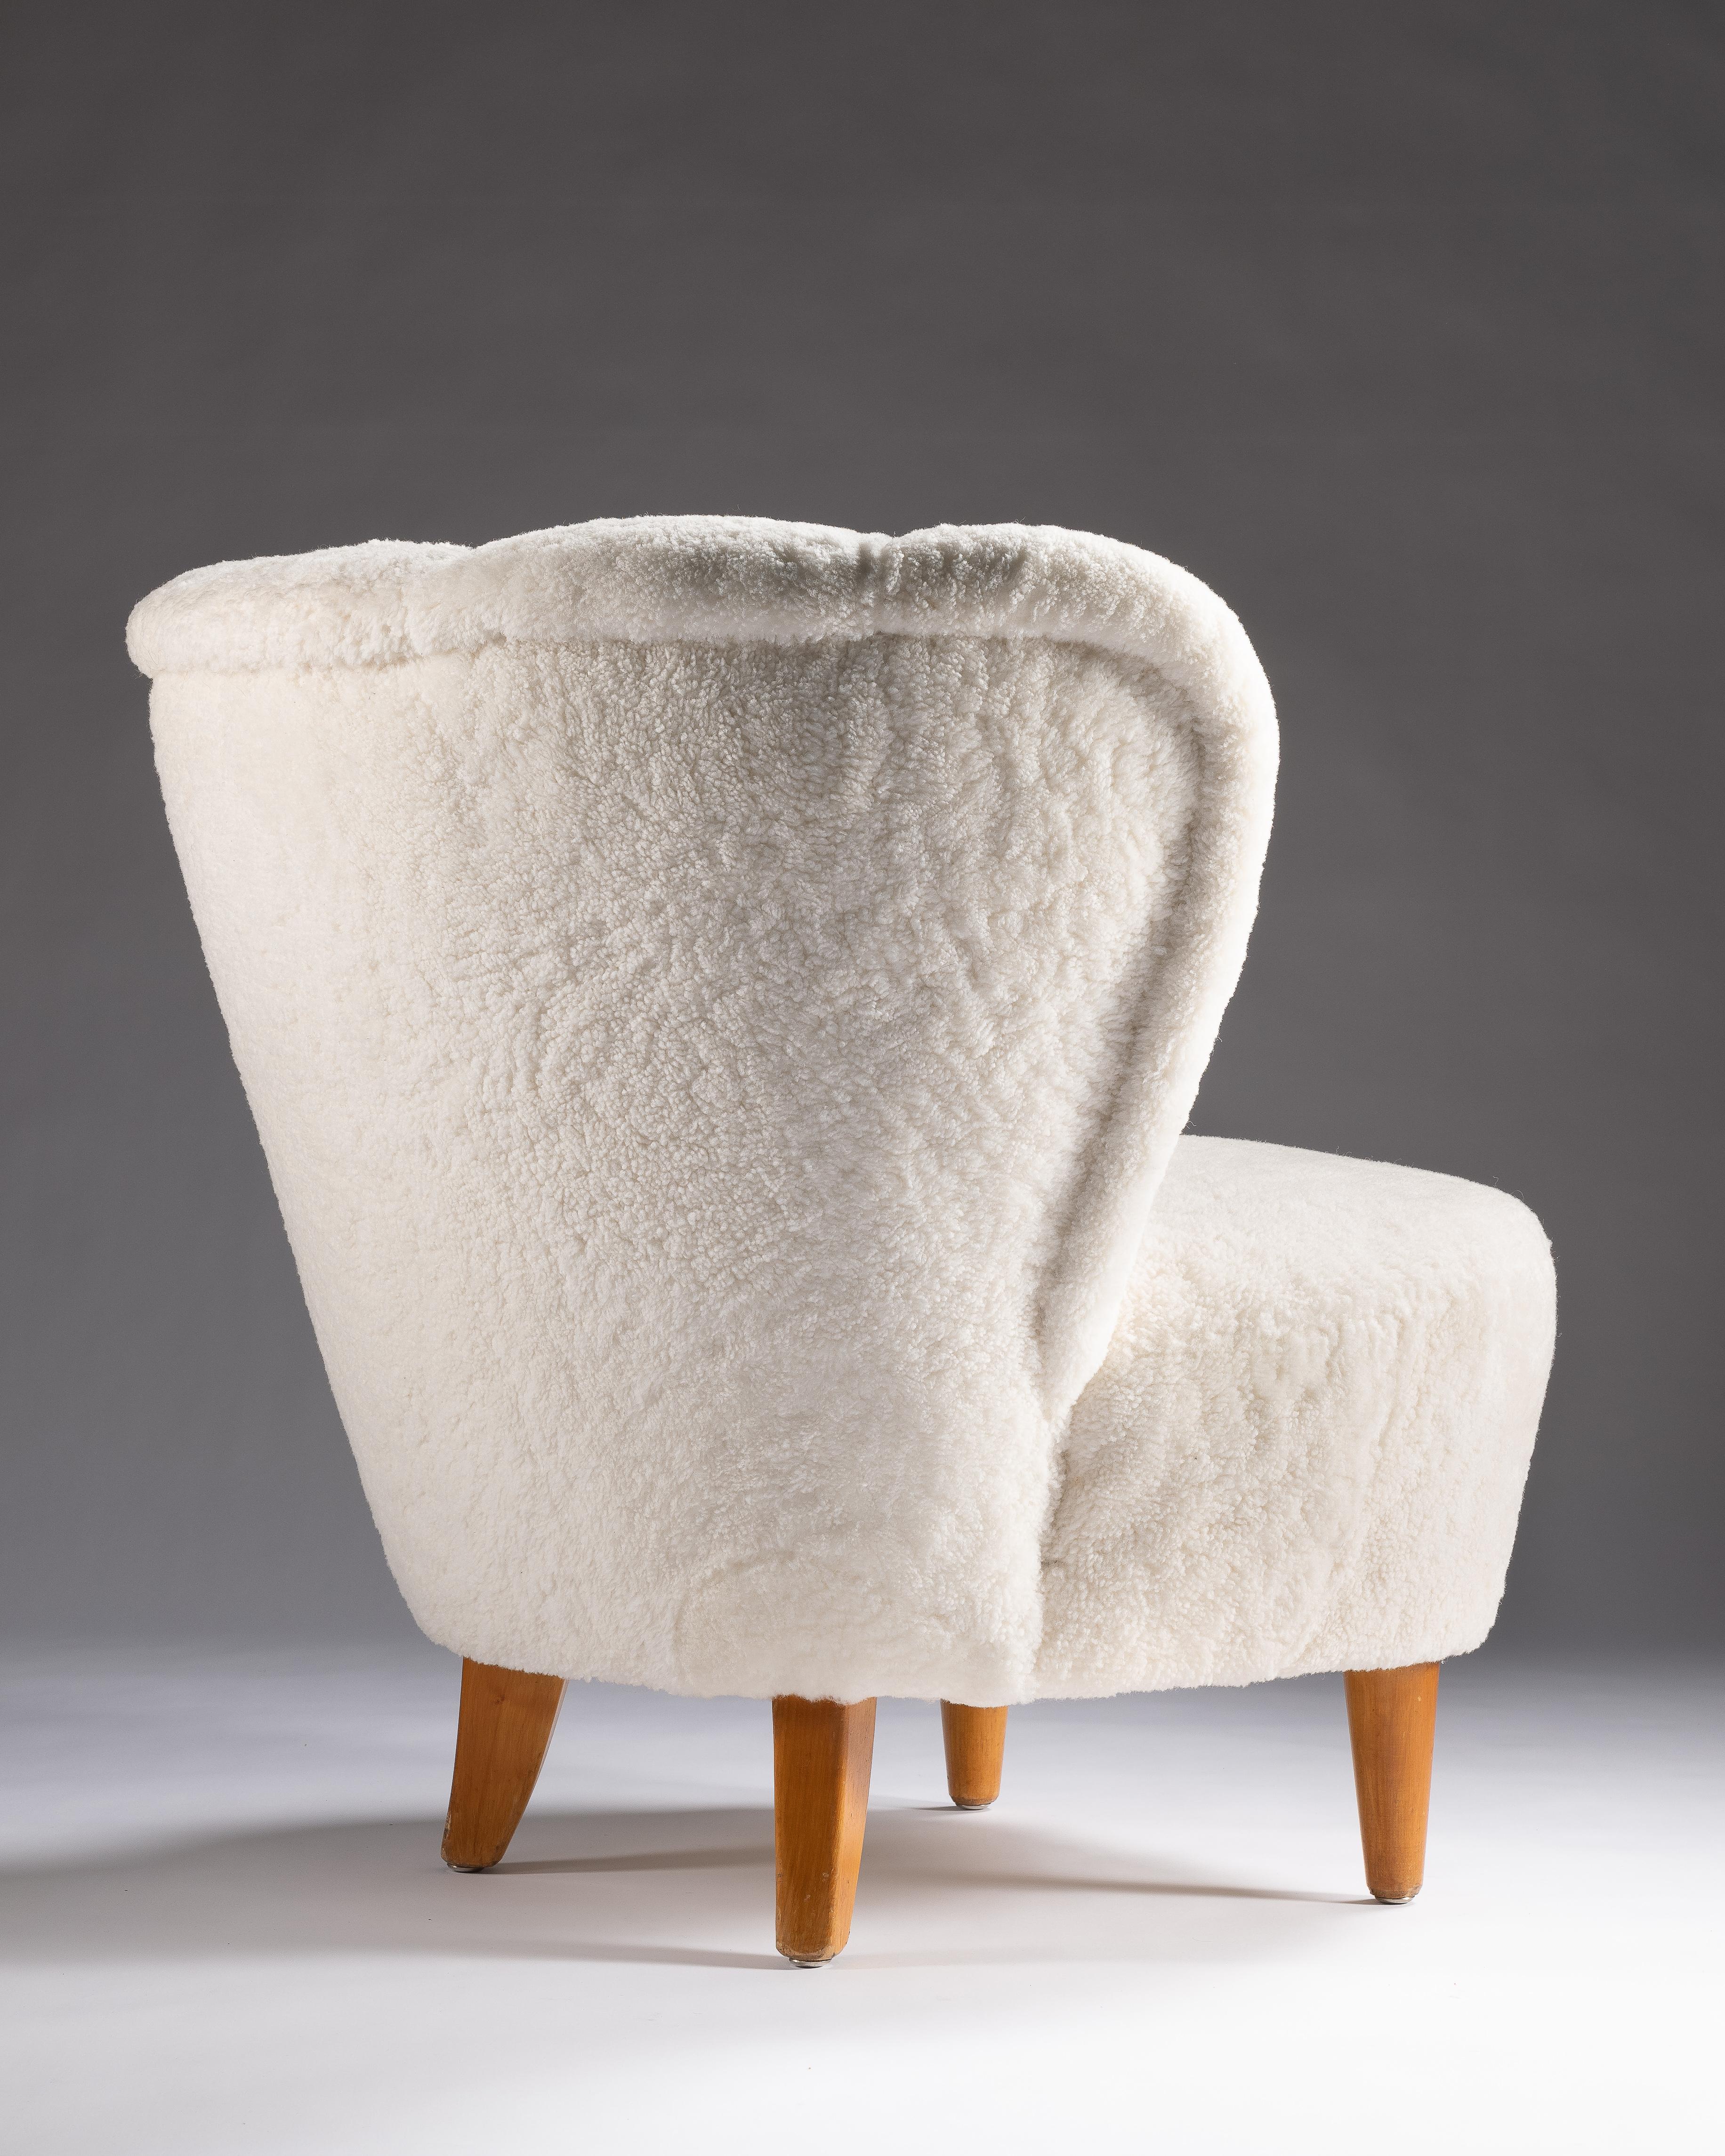 Pair of Scandinavian Vintage White Easy Chairs 1950s, Shearling Upholstery For Sale 1